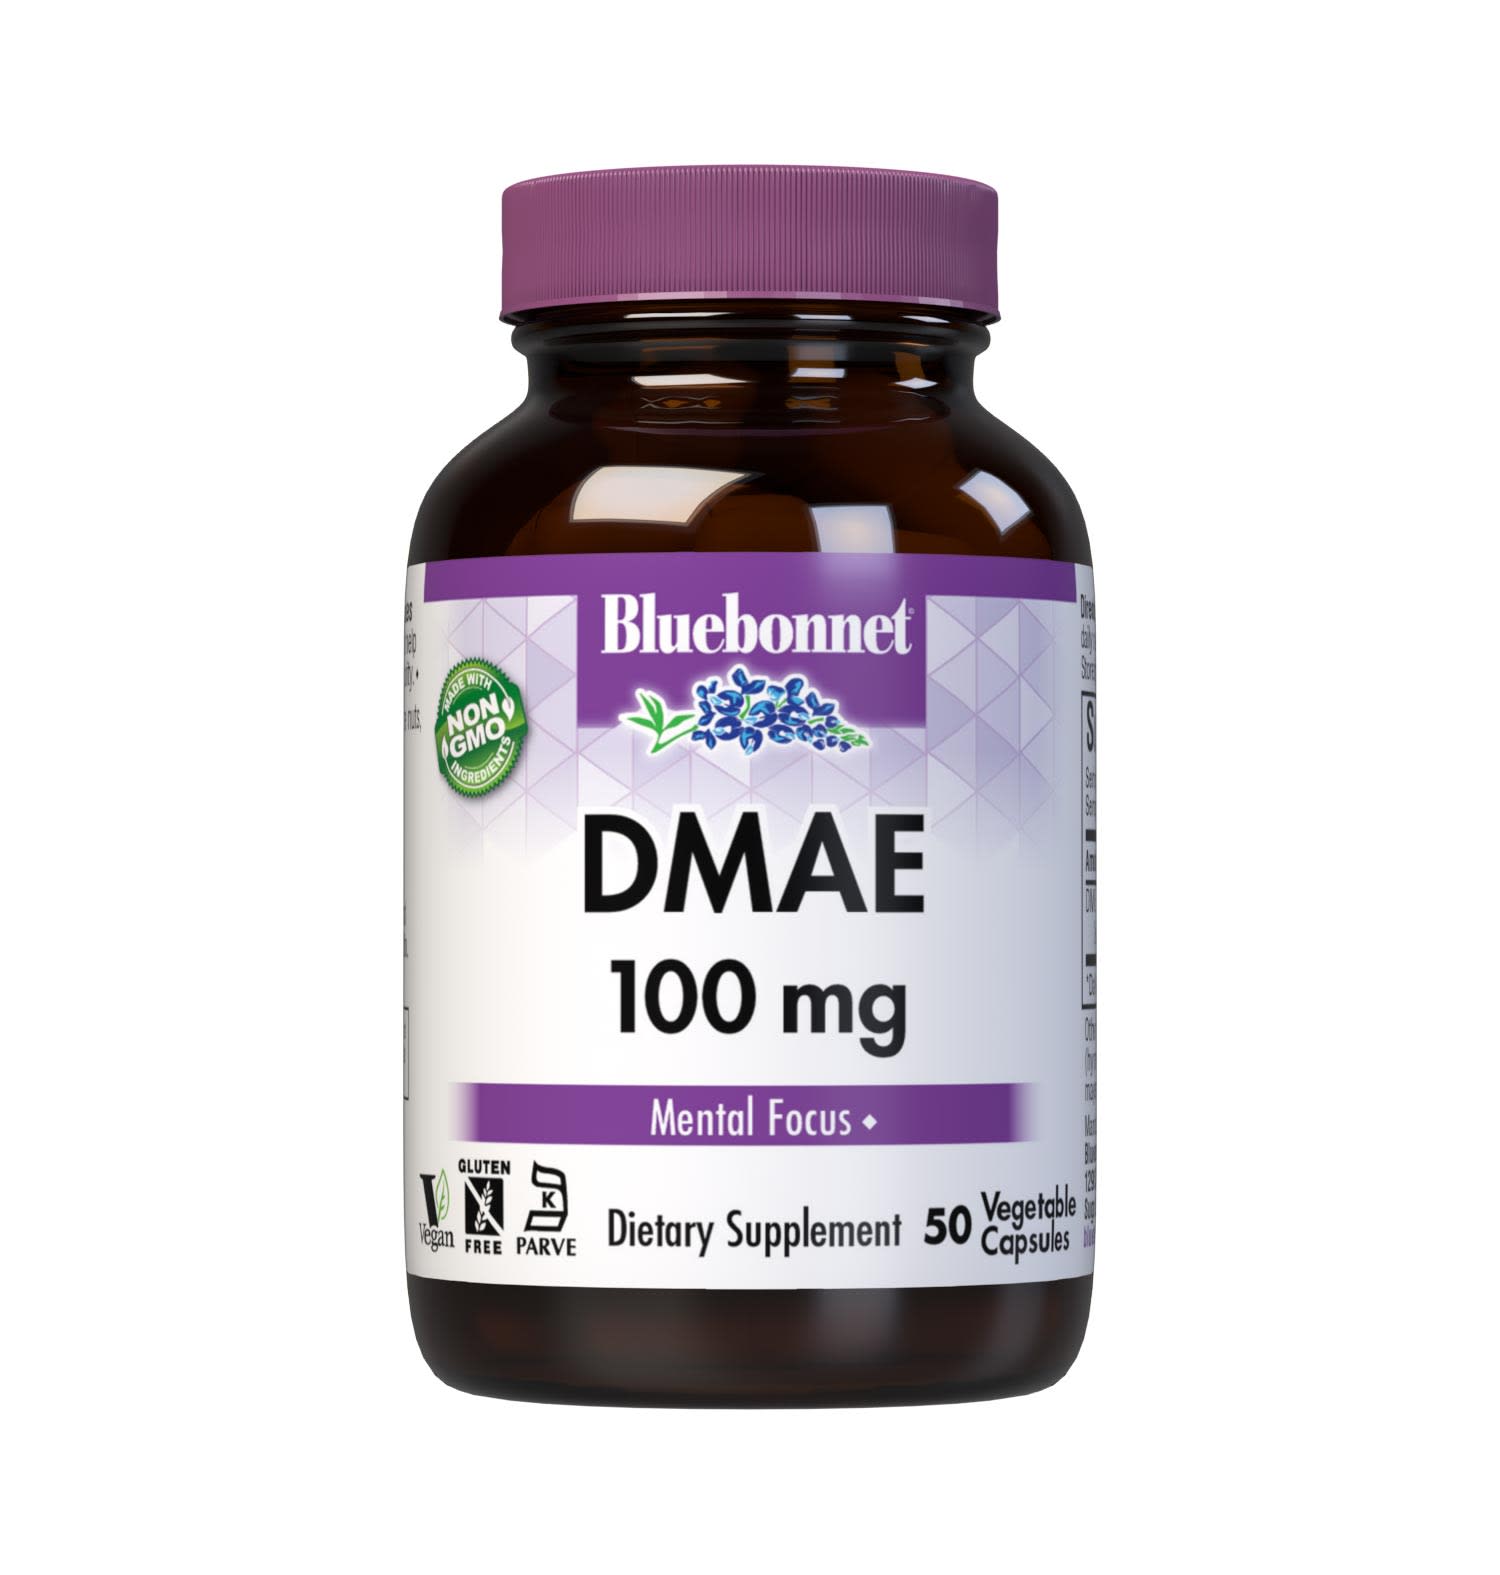 Bluebonnet’s DMAE 100 mg 50 Vegetable Capsules are formulated with 2-dimethylaminoethanol bitartrate to help support learning, memory, mental focus, and clarity. #size_50 count